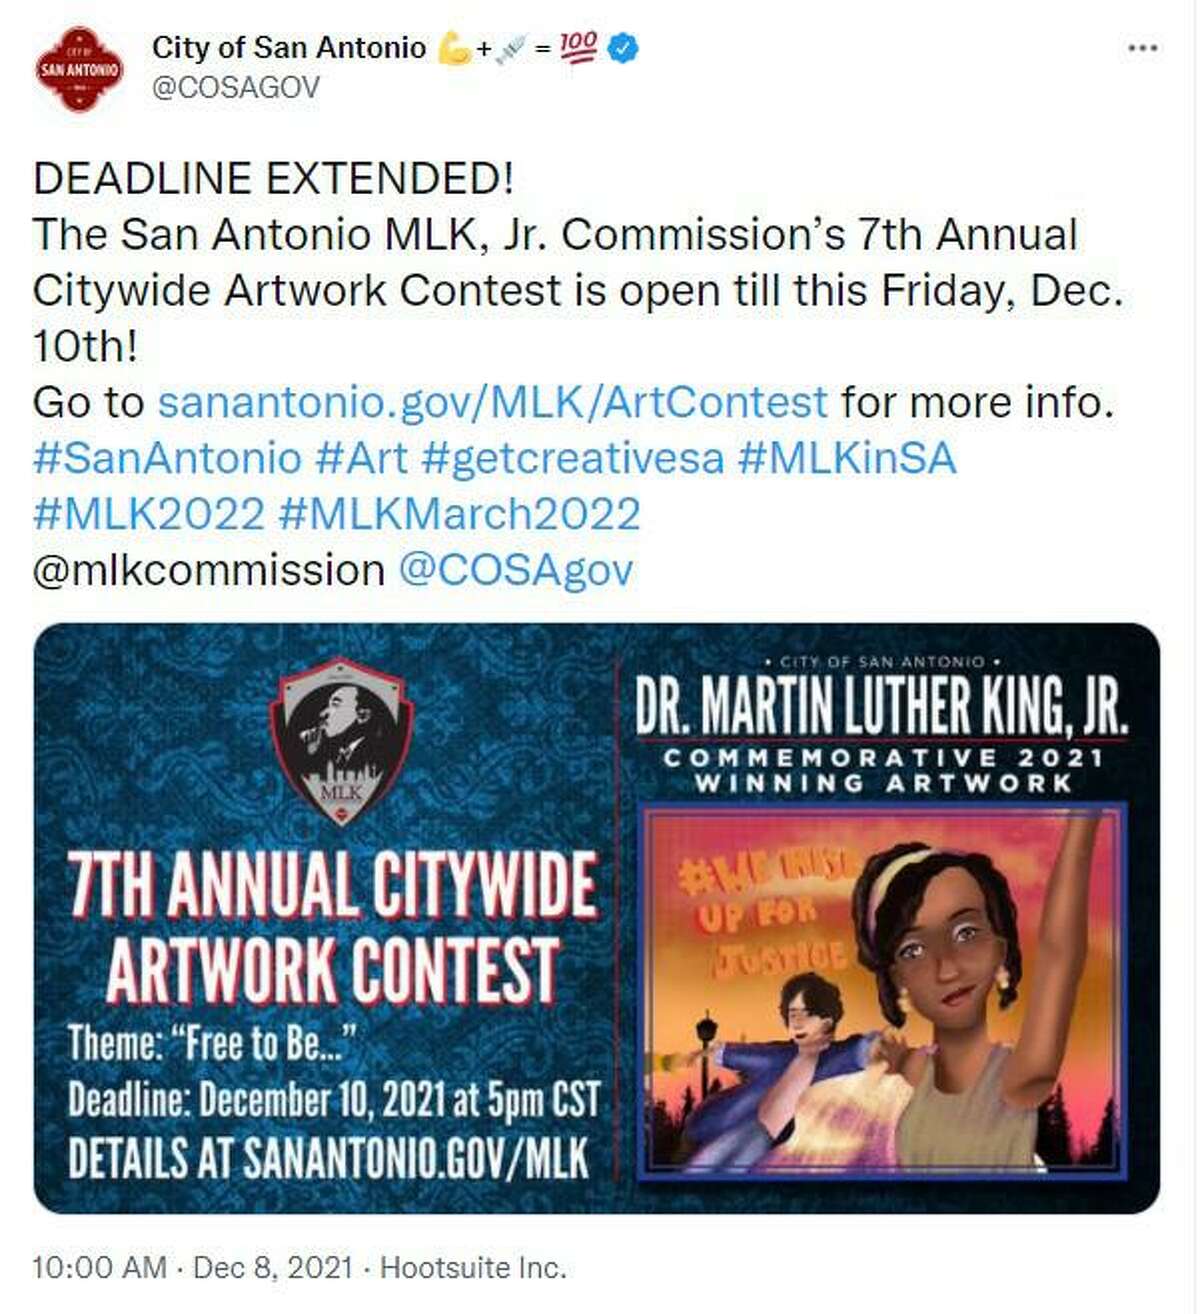 The deadline for the San Antonio MLK, Jr. Commission’s art contest is extended to Friday, Dec. 10.